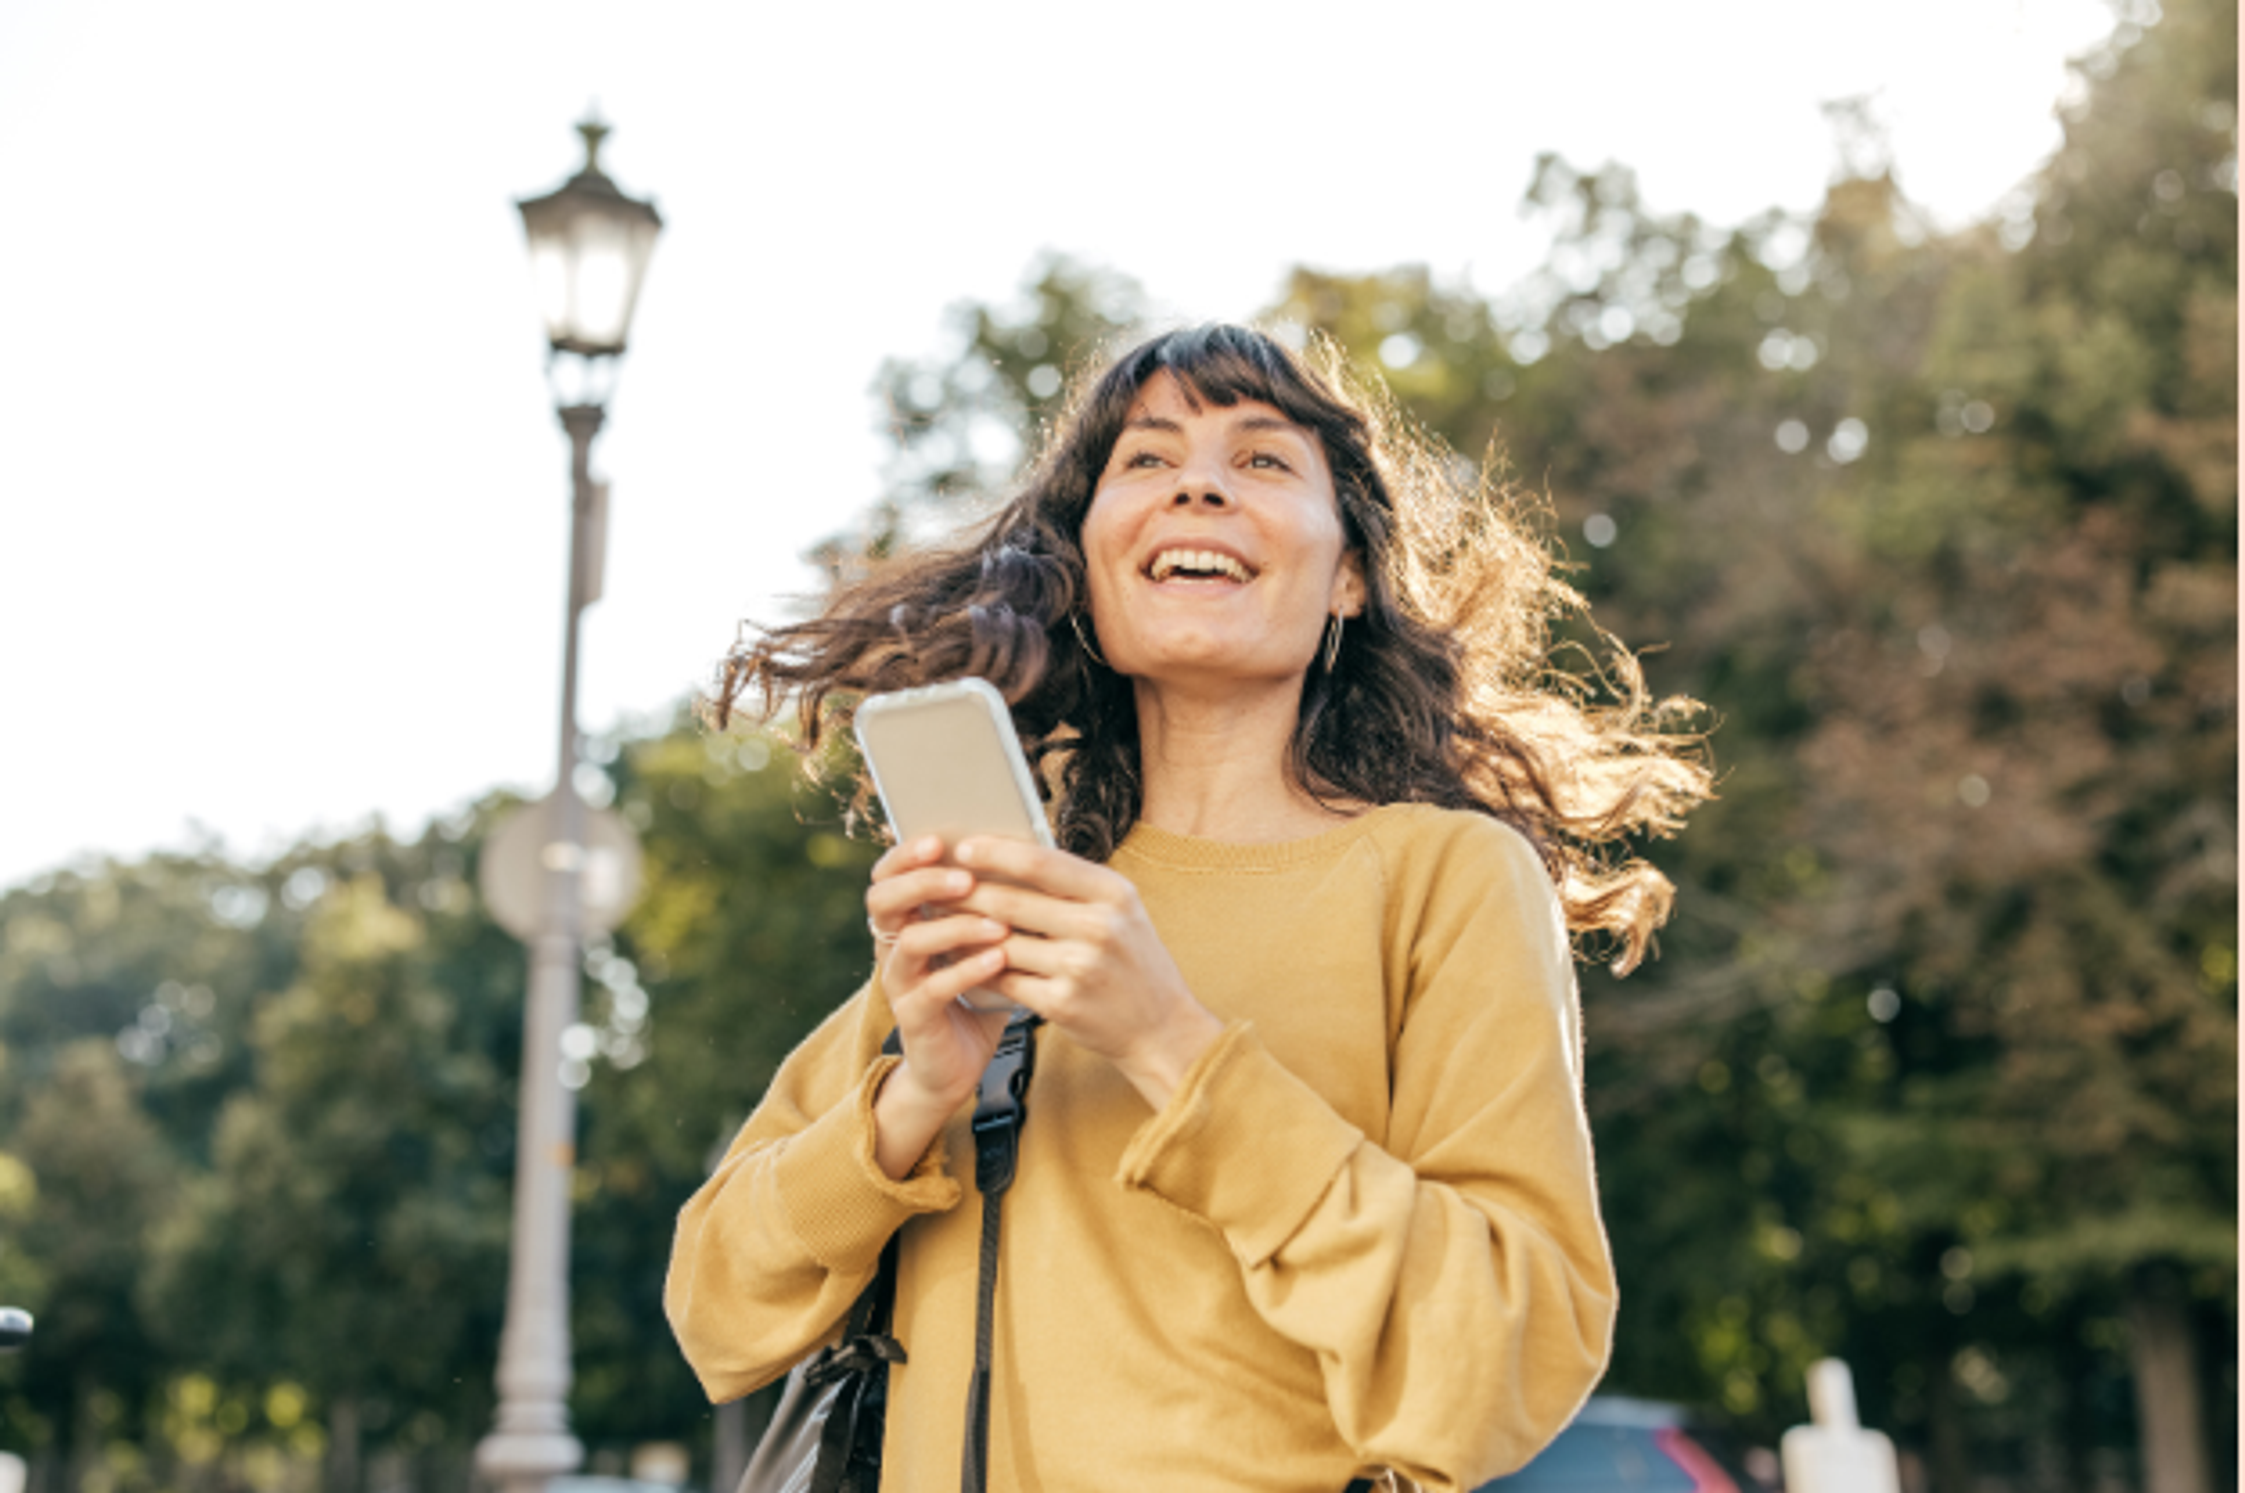 A woman in yellow sweater holds her phone and is smiling into the distance